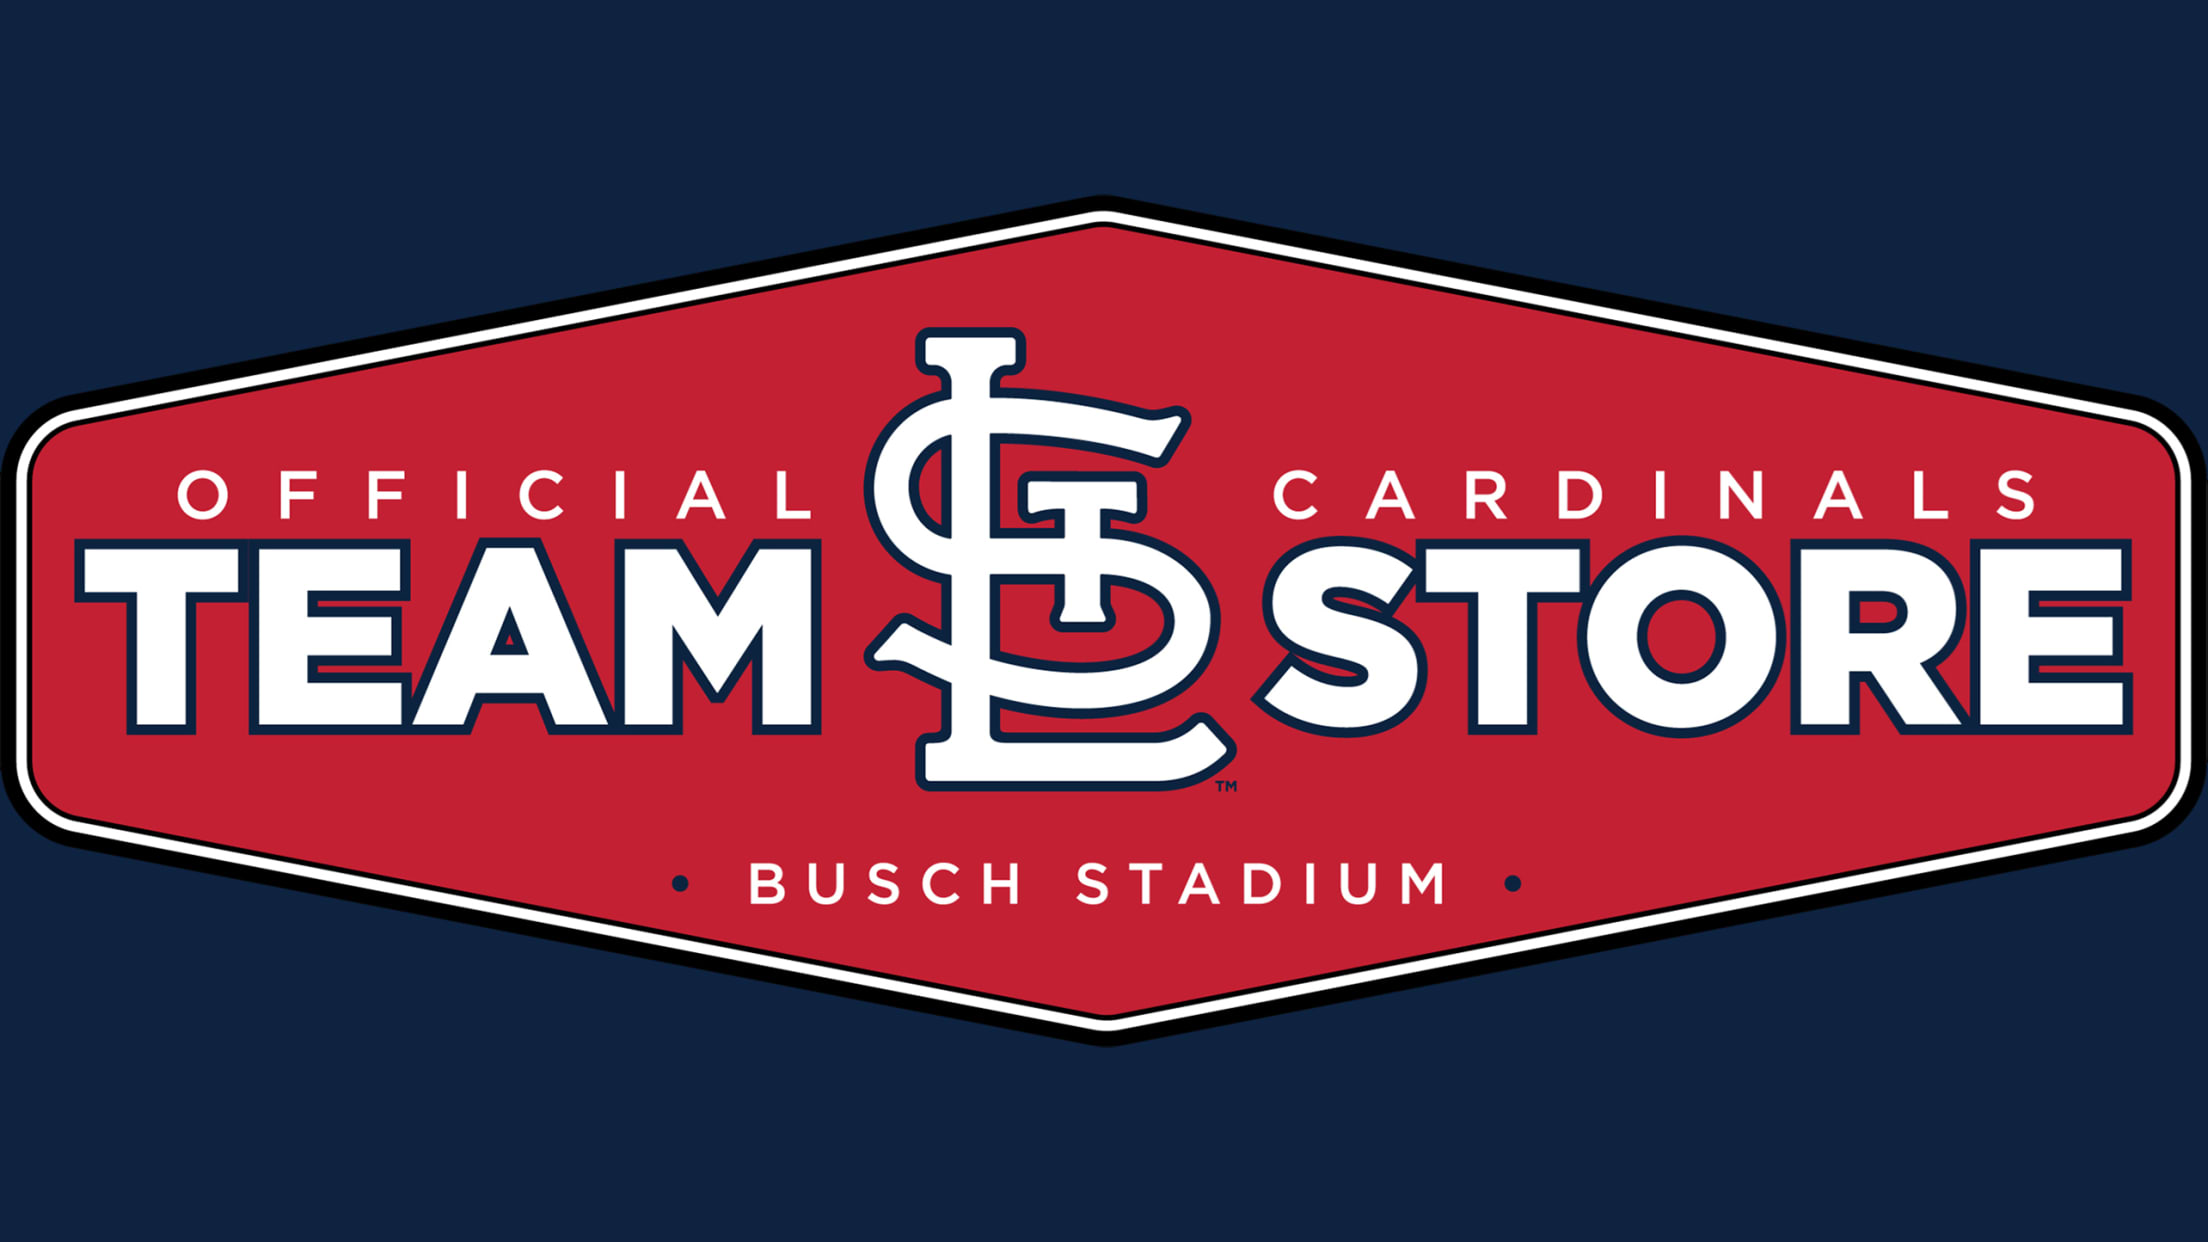 St. Louis Cardinals - New to the Official Cardinals Team Store